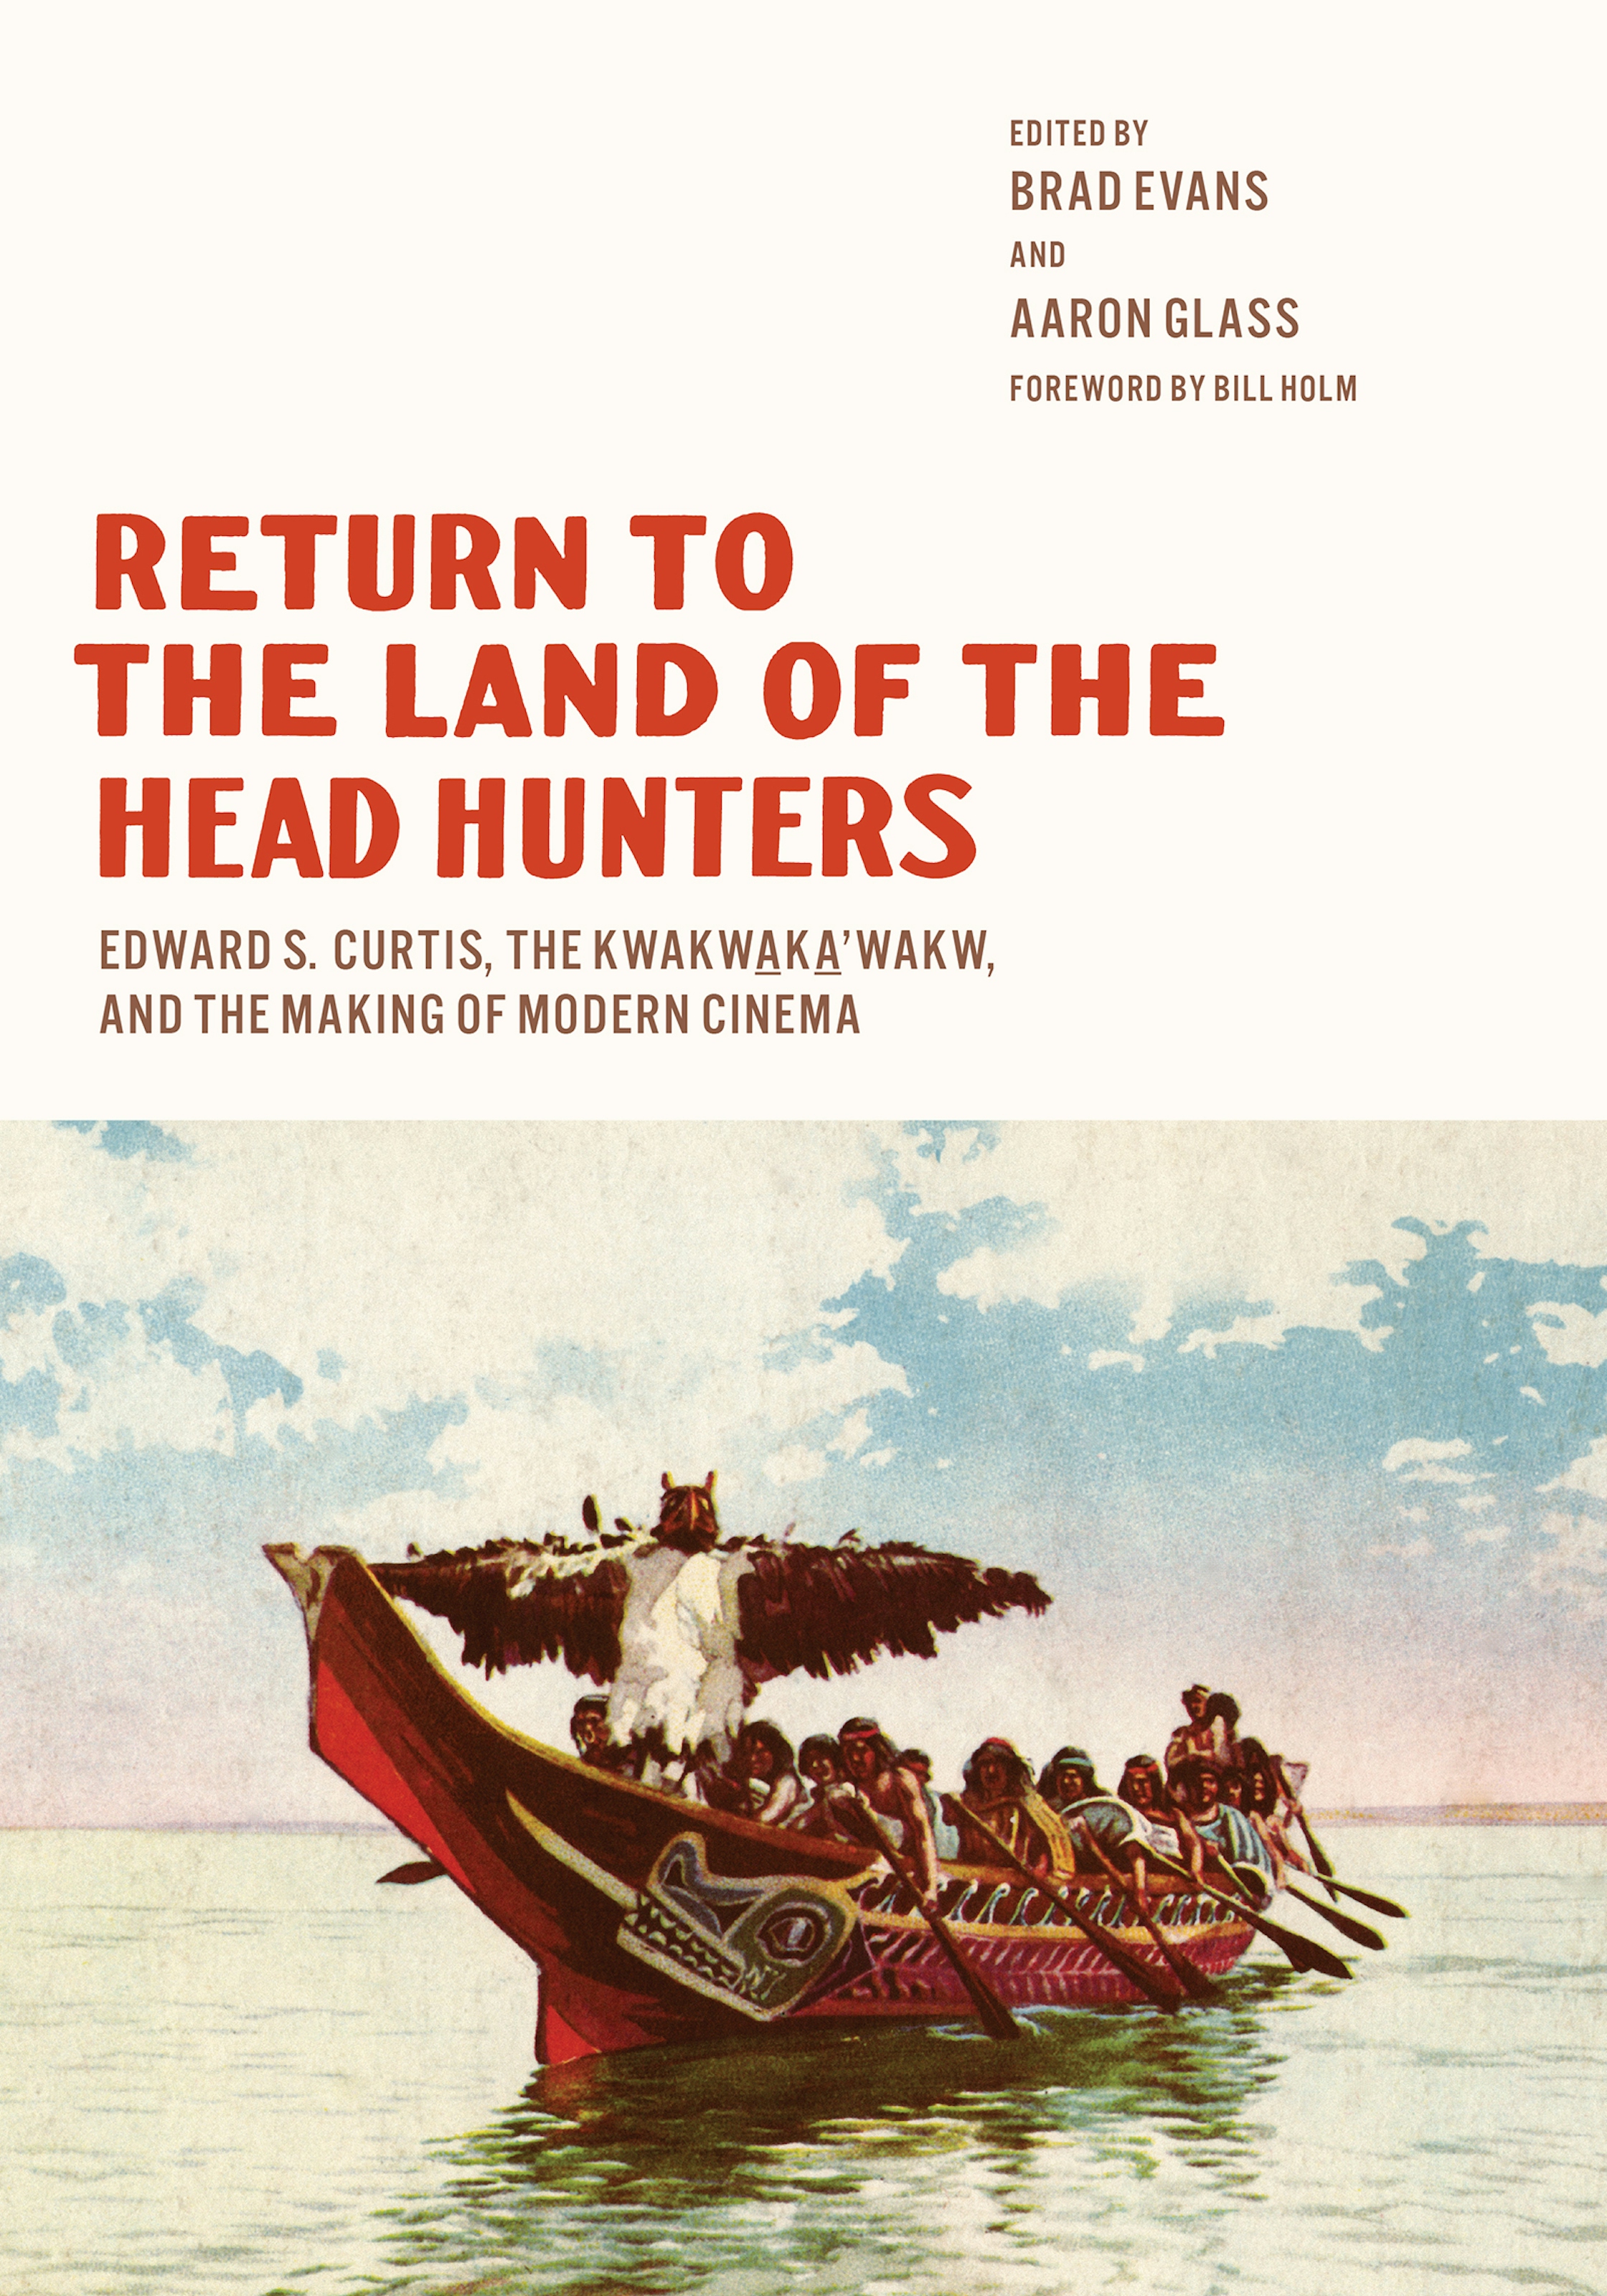 Return to the Land of the Head Hunters